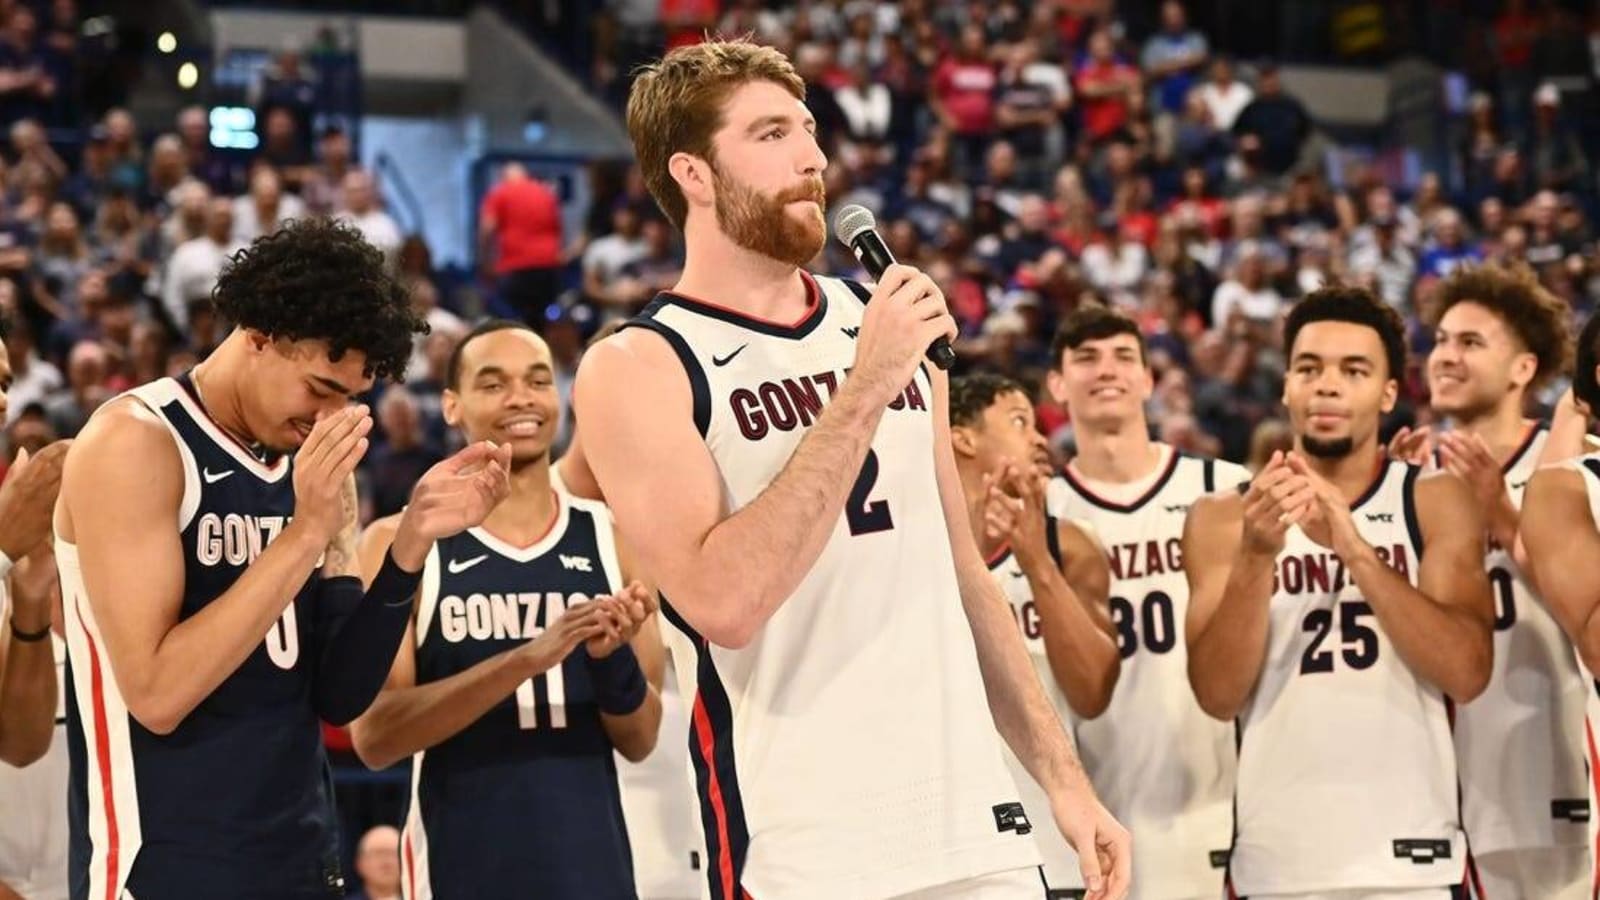 No. 2 Gonzaga begins anew behind All-American Drew Timme